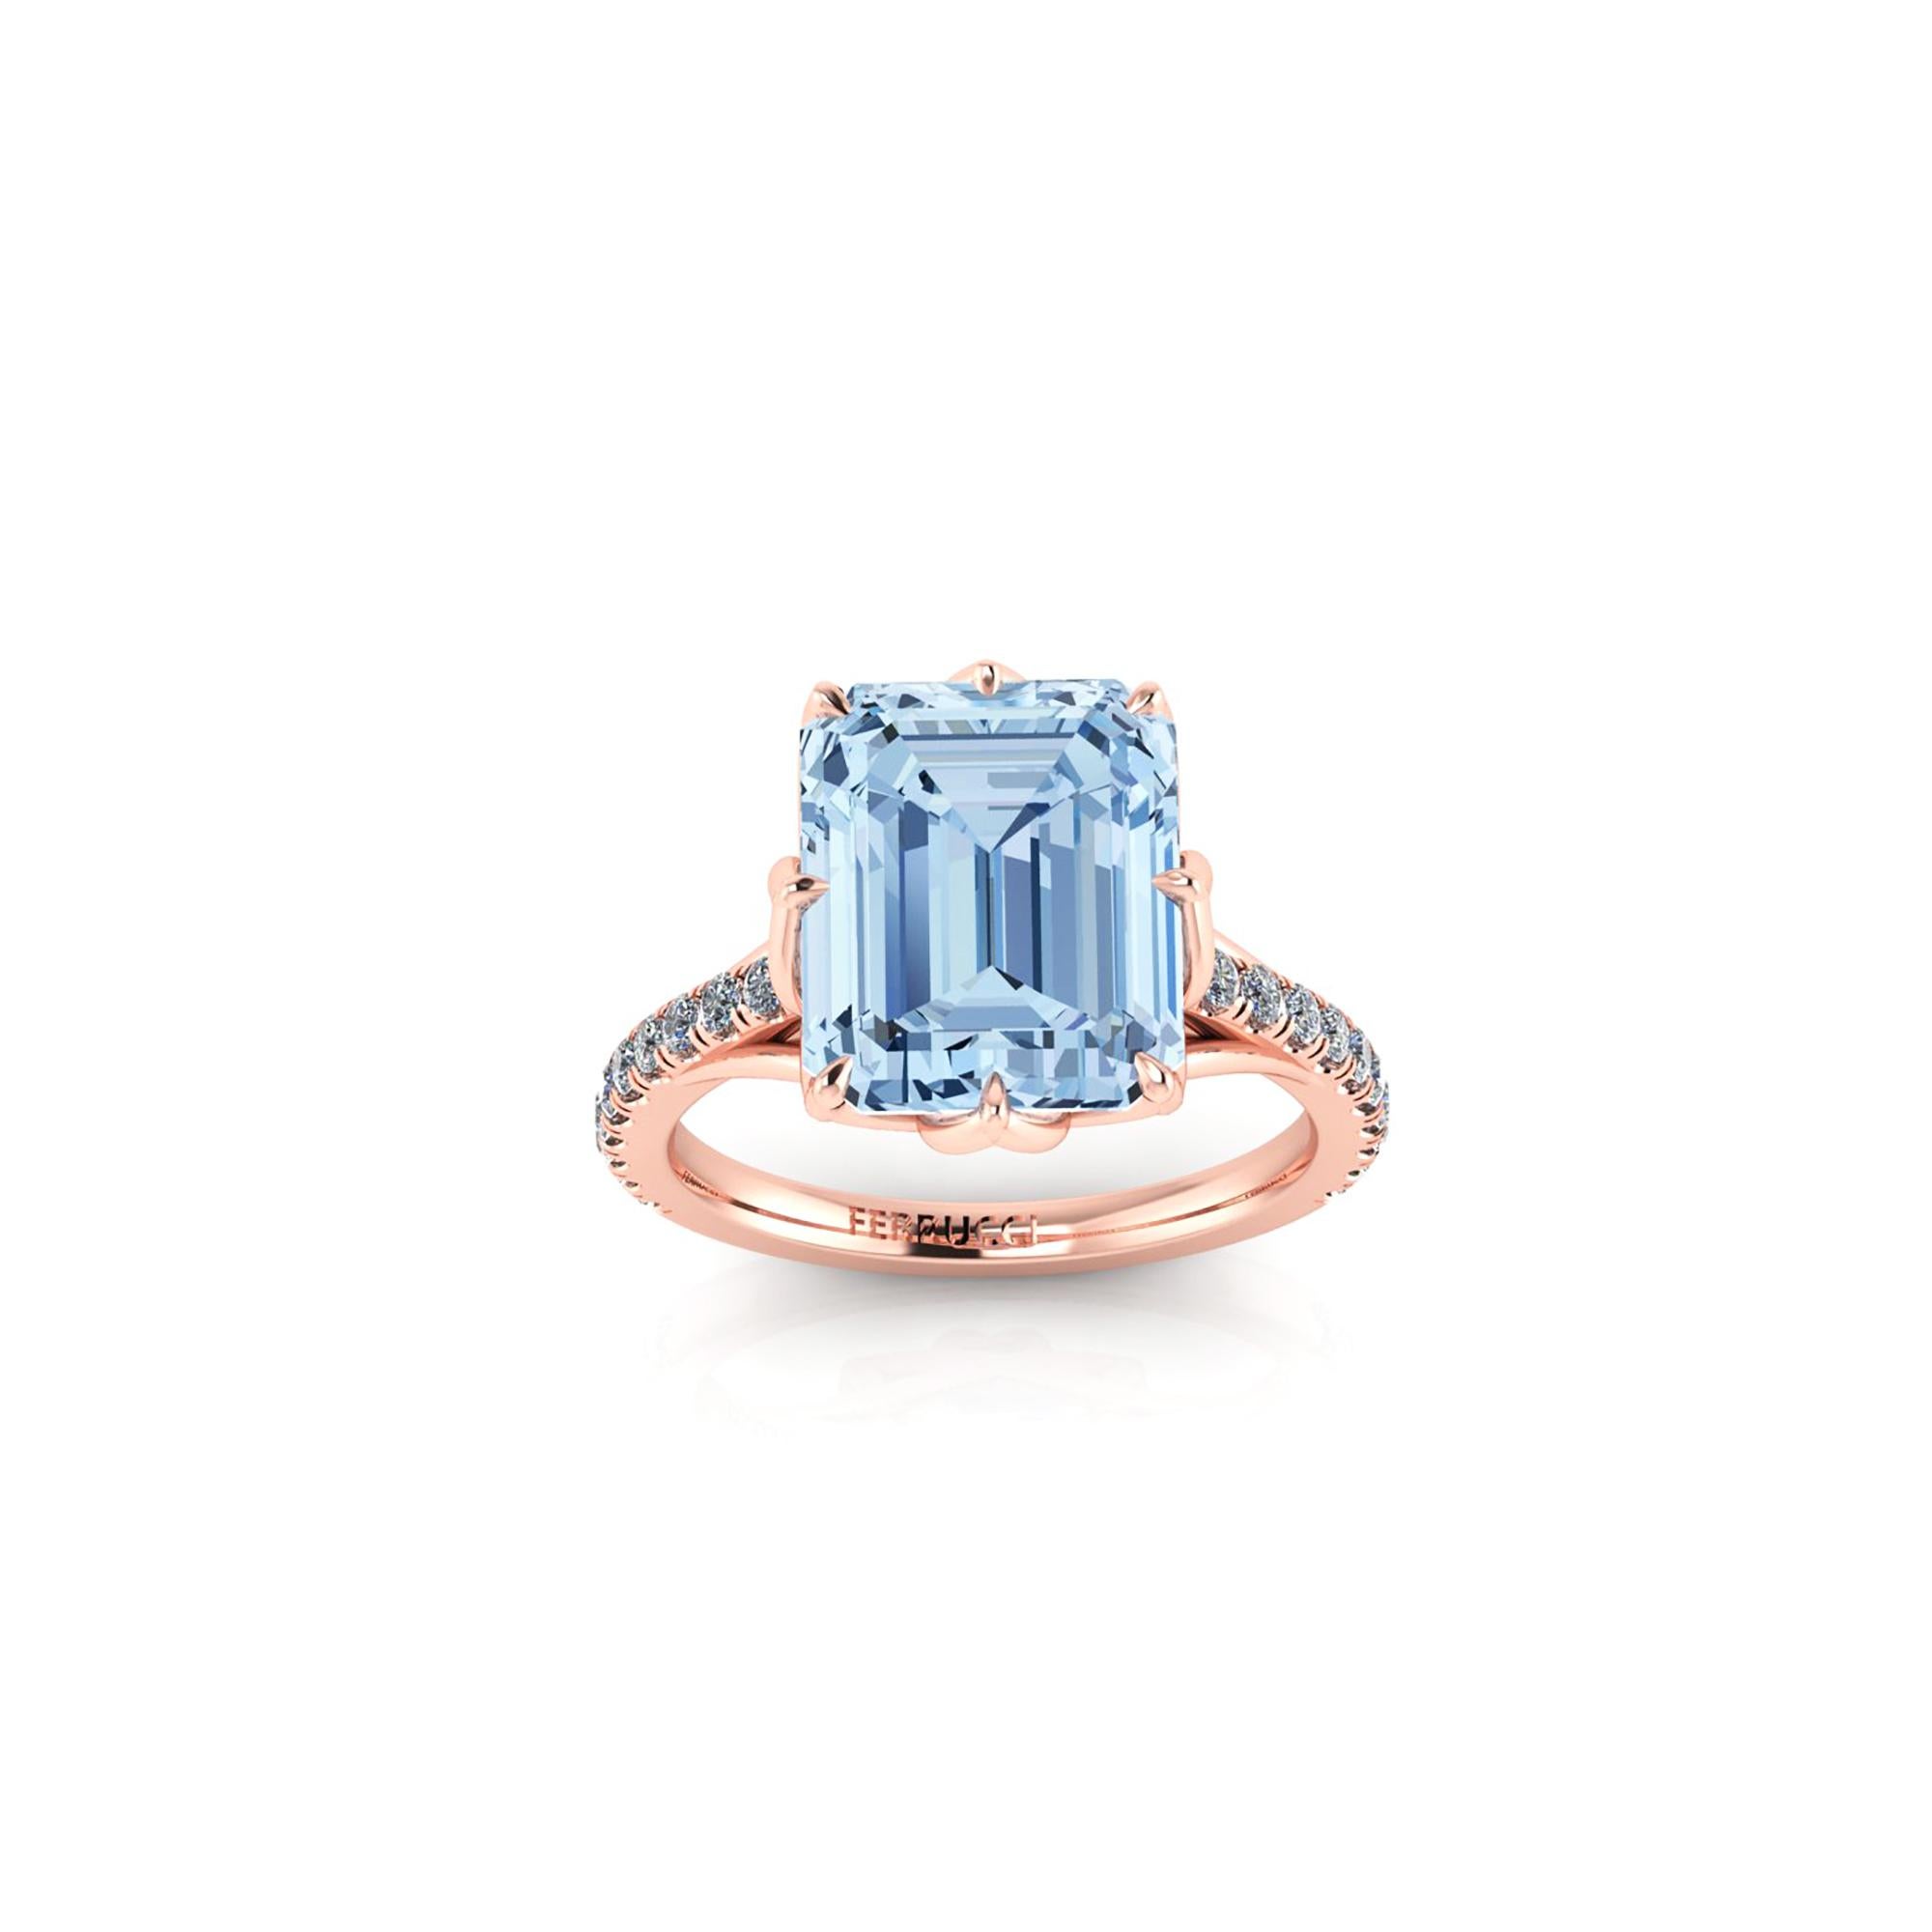 6.56 carat Aquamarine, emerald cut, very high quality color, eye clean gem, with a pave' of bright white diamonds G color, of approximately  total carat weight of 0.35 carat, set in a 18k rose gold floral-vine motive,  manufactured with the best